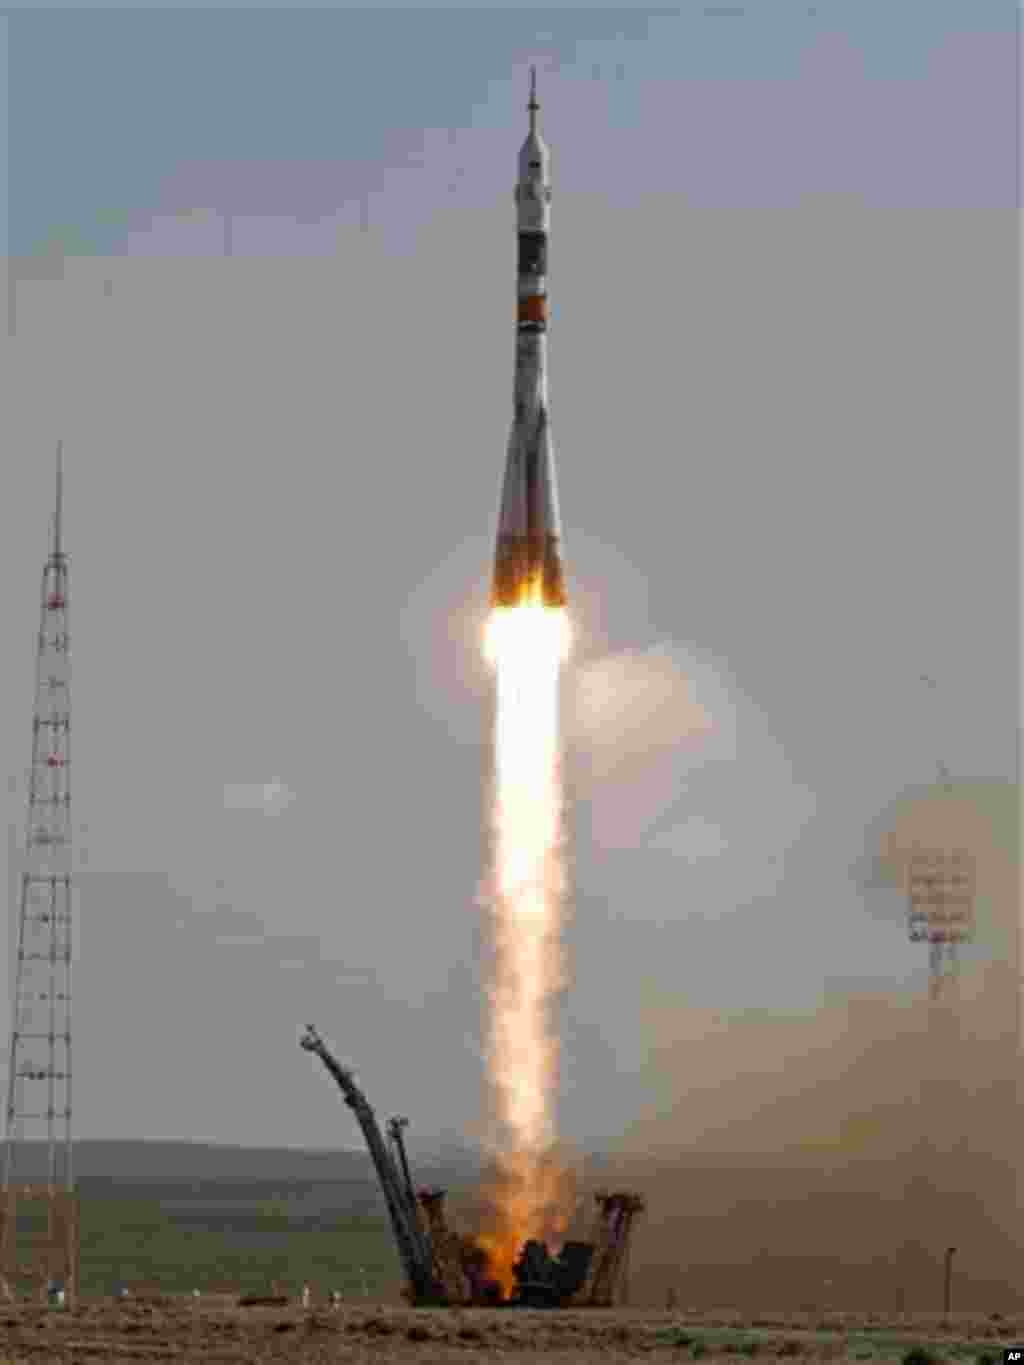 The Soyuz-FG rocket booster with a Soyuz TMA-04M spaceship carrying a new crew to the International Space Station, ISS, blasts off from the Russian leased Baikonur cosmodrome, in Kazakhstan, Tuesday, May 15, 2012. The Russian rocket is carrying U.S. astro